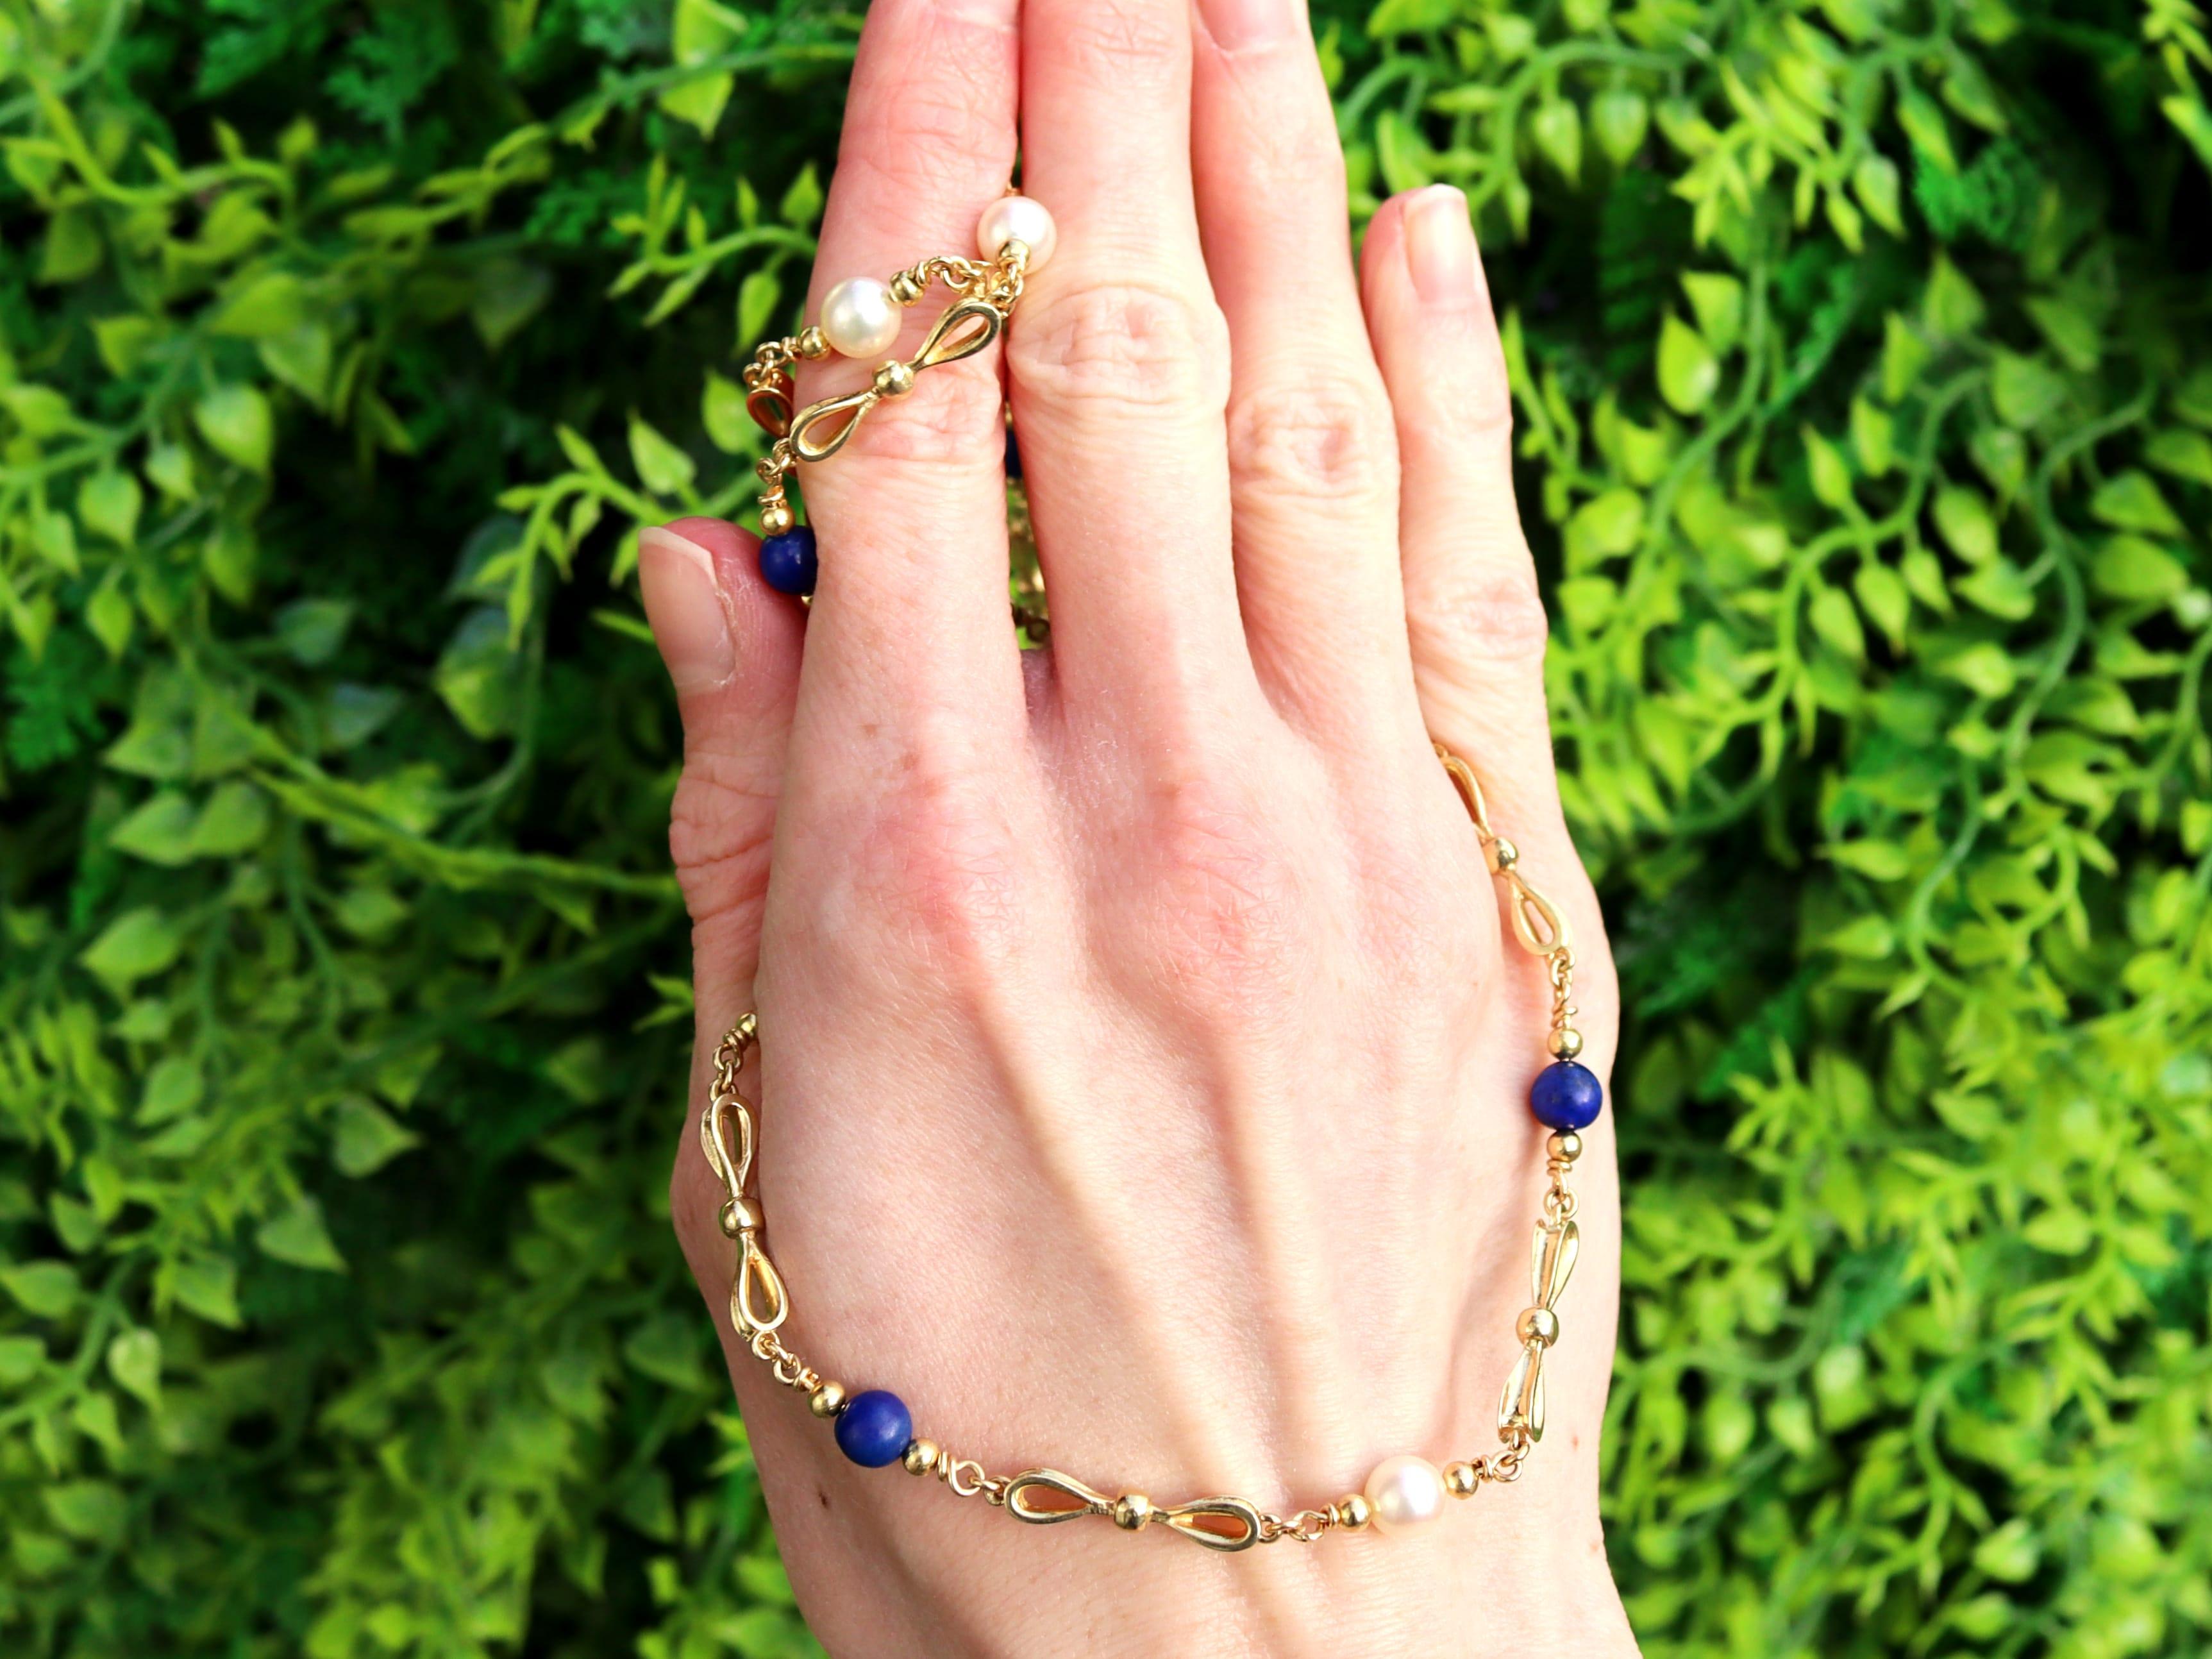 An exceptional, fine and impressive, vintage 7.80 carat lapis lazuli, pearl and 18k yellow gold chain necklace; part of our diverse collection of vintage necklaces.

This exceptional, fine and impressive vintage necklace has been crafted in 18k